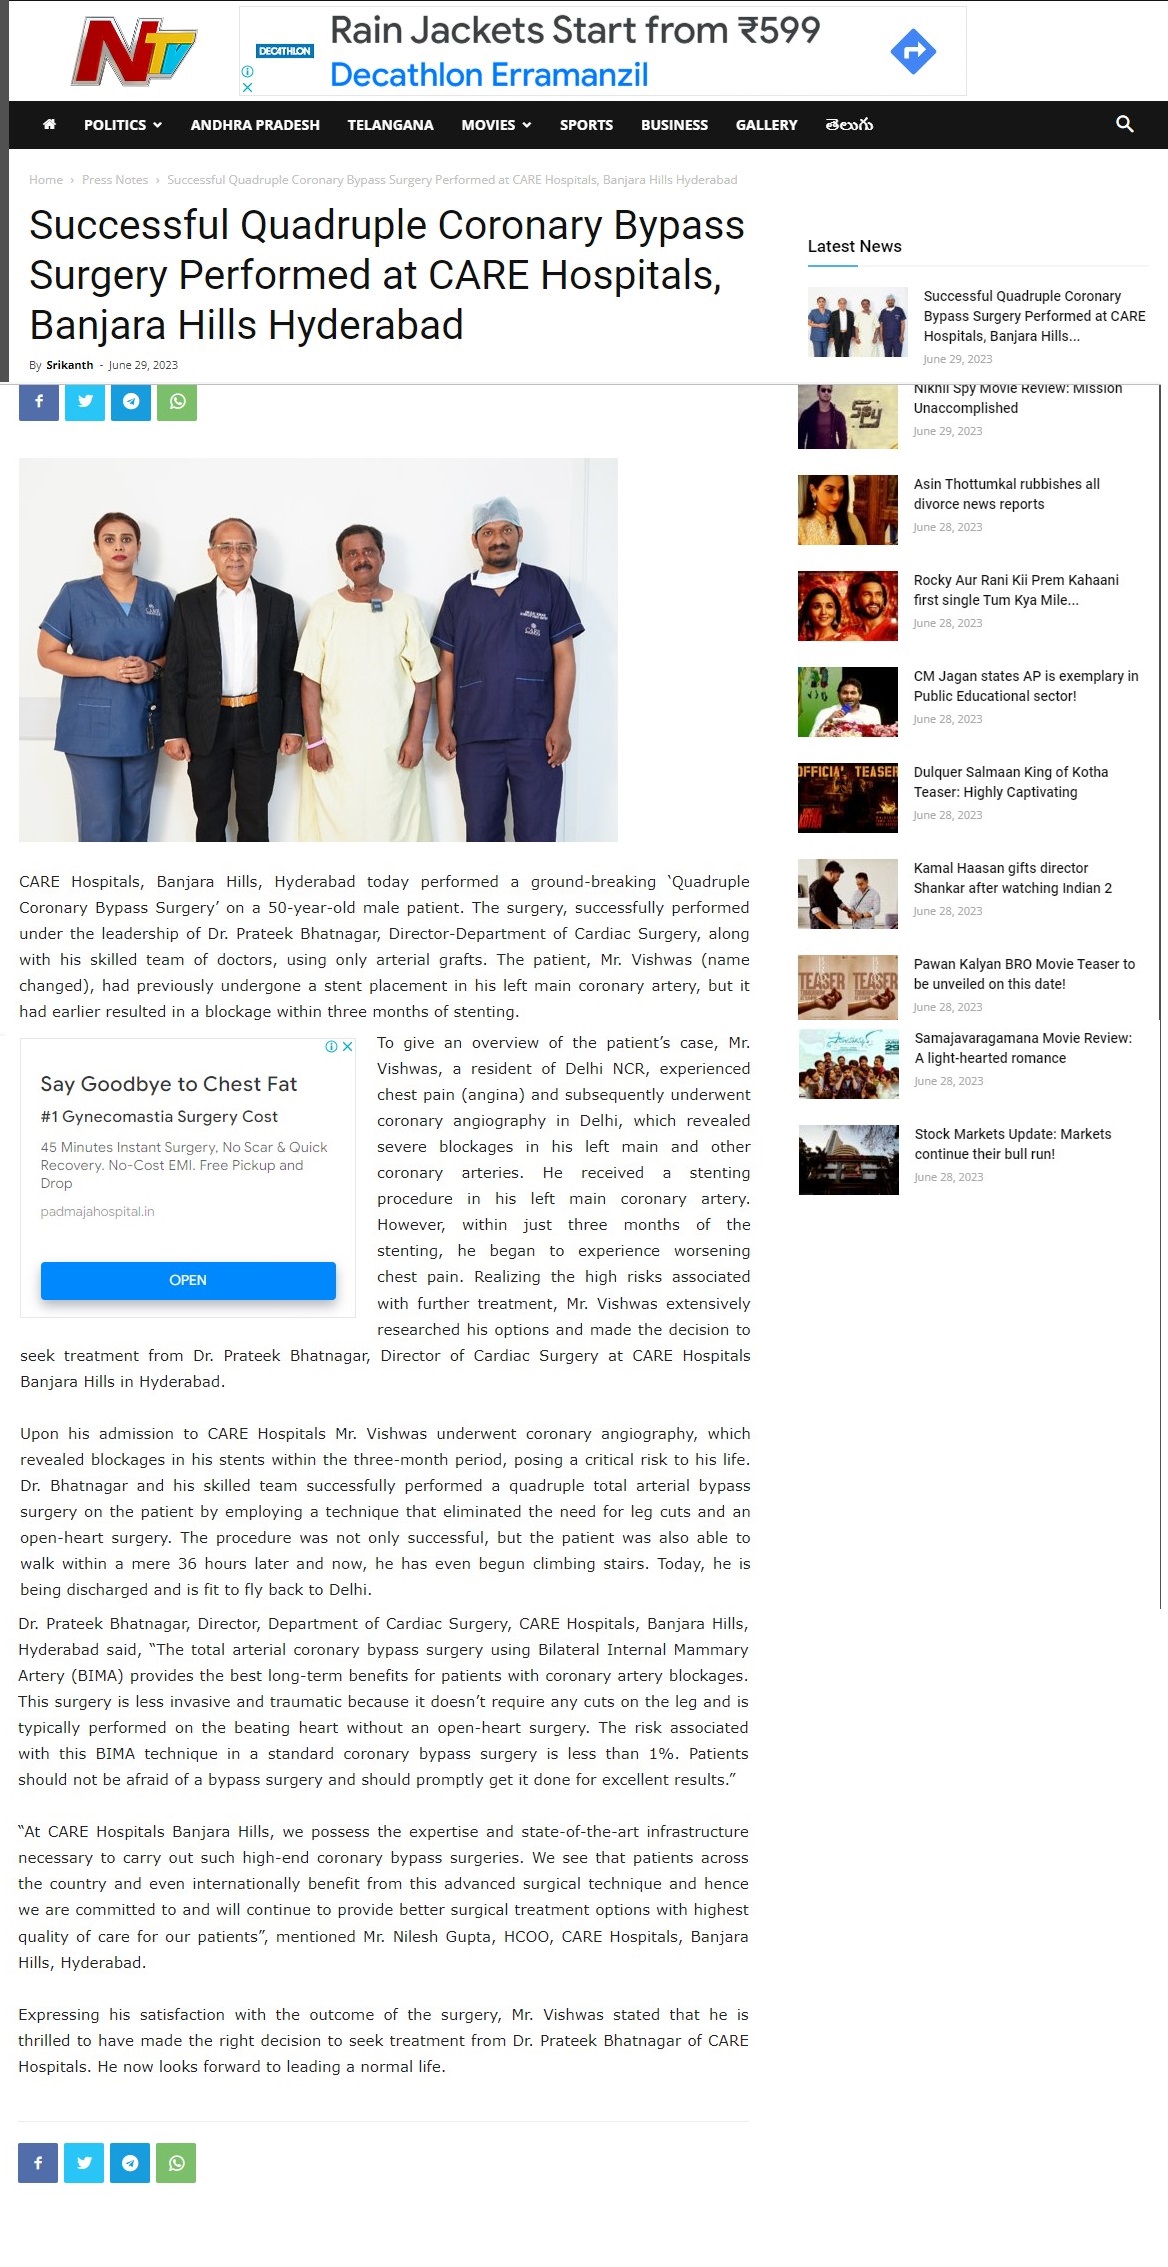 CARE Hospitals Banjara Hills Treats Severe Coronary Artery Blockages in 50 Years old Men News Coverage in NTV Digital Online English